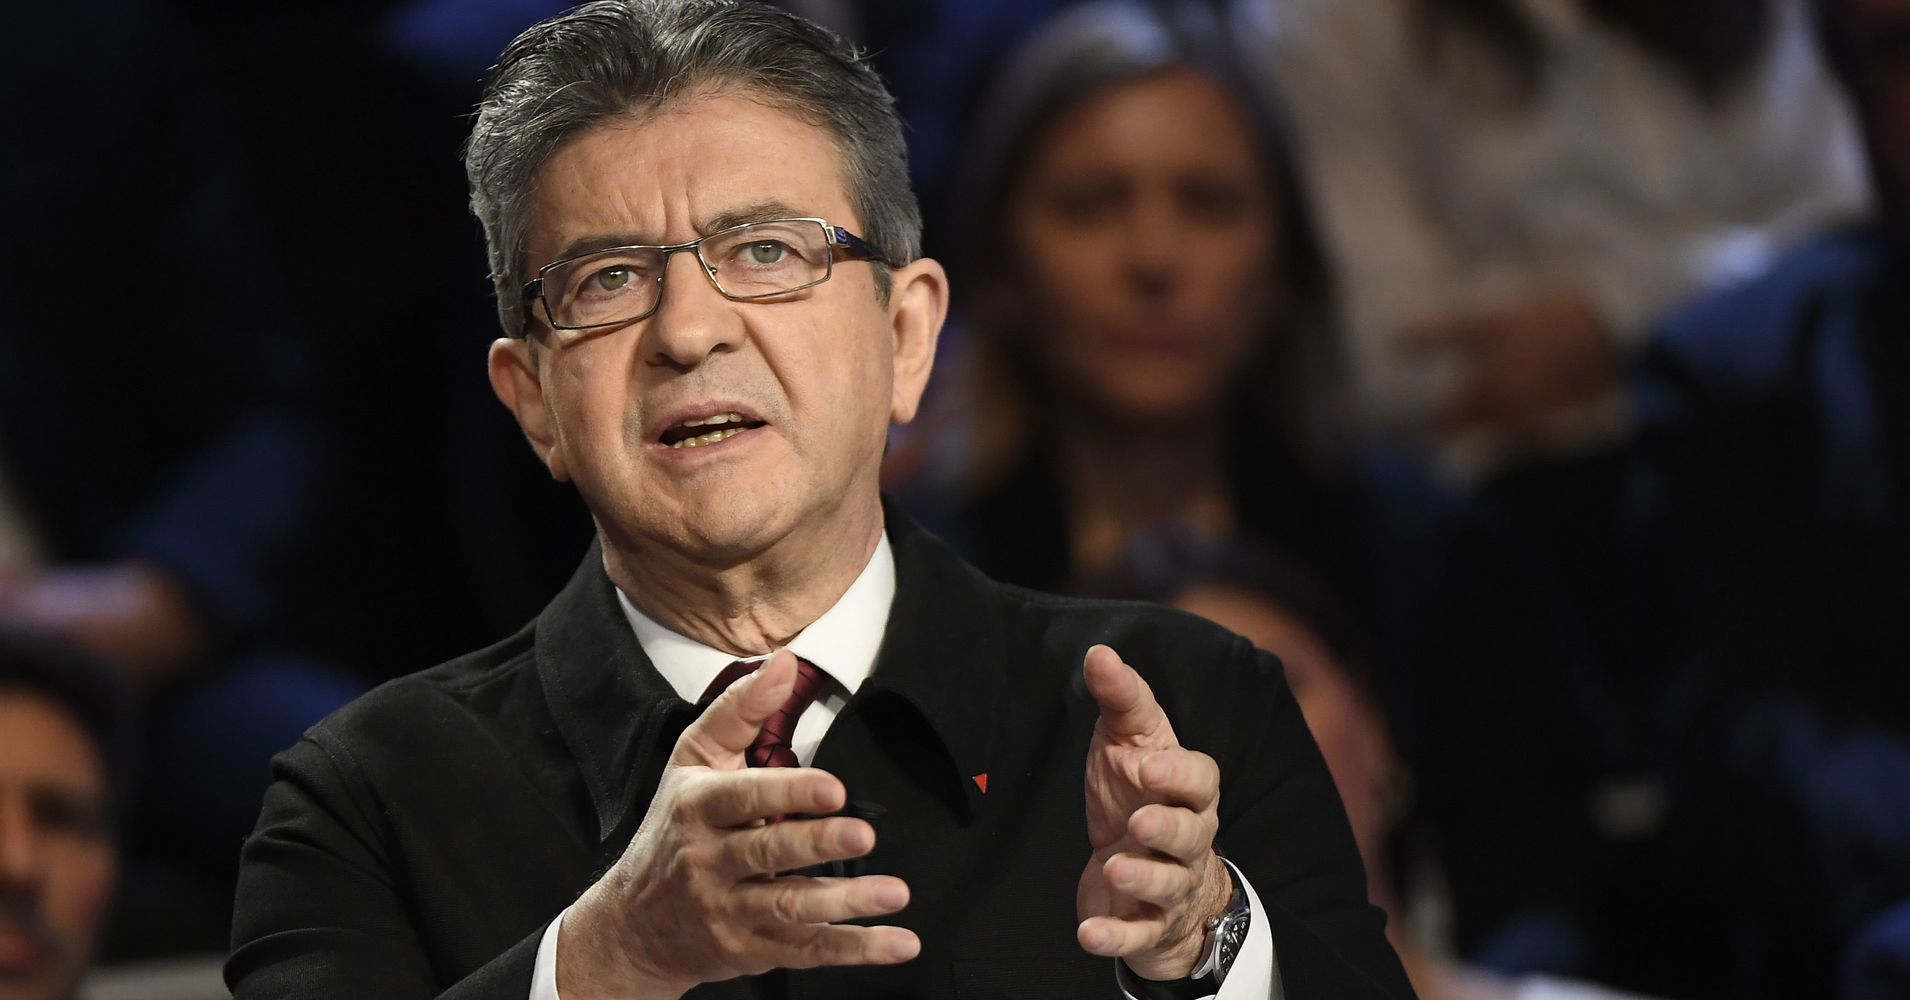 Why You Should Pay Attention To Jean-Luc Mélenchon And The French ...